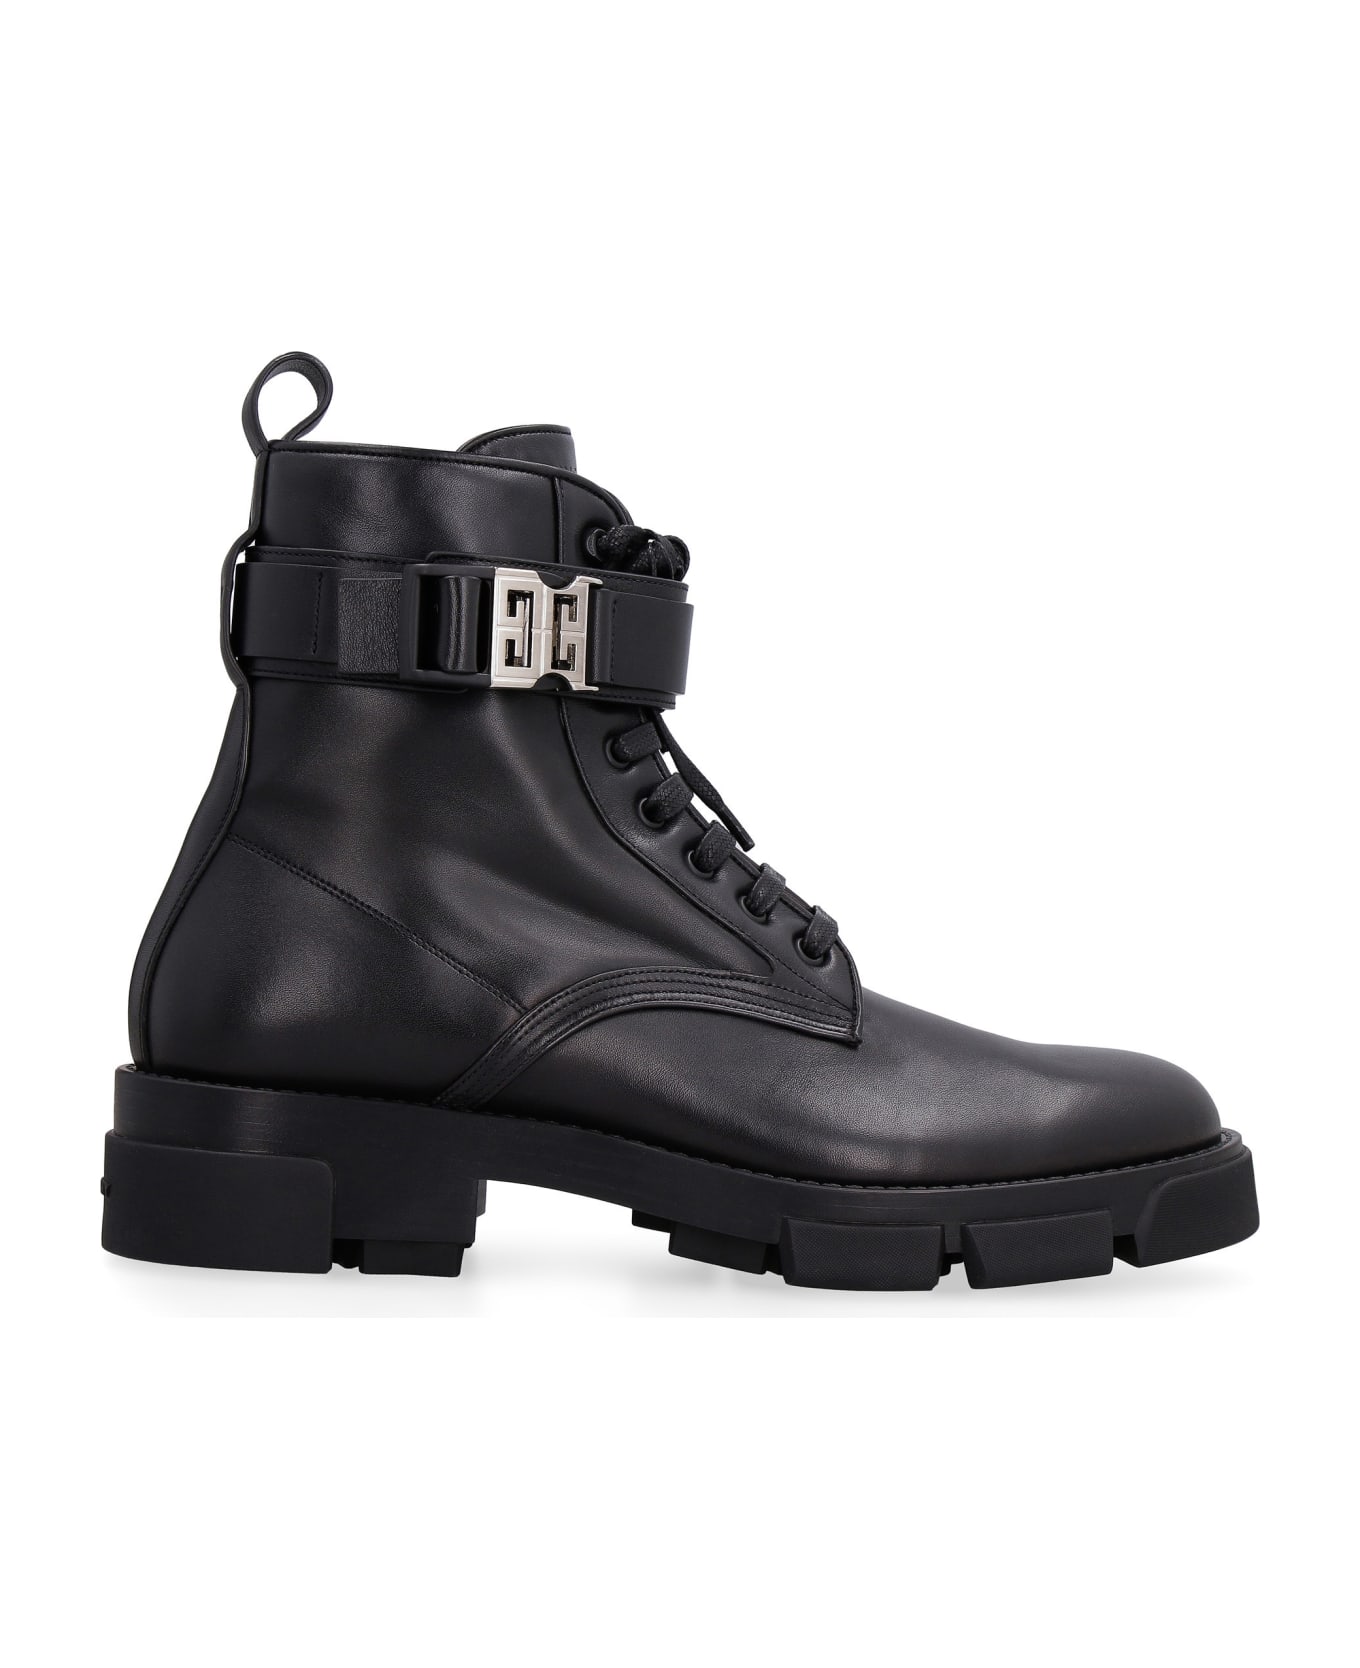 Givenchy Terra Leather Ankle Boots - Black ブーツ